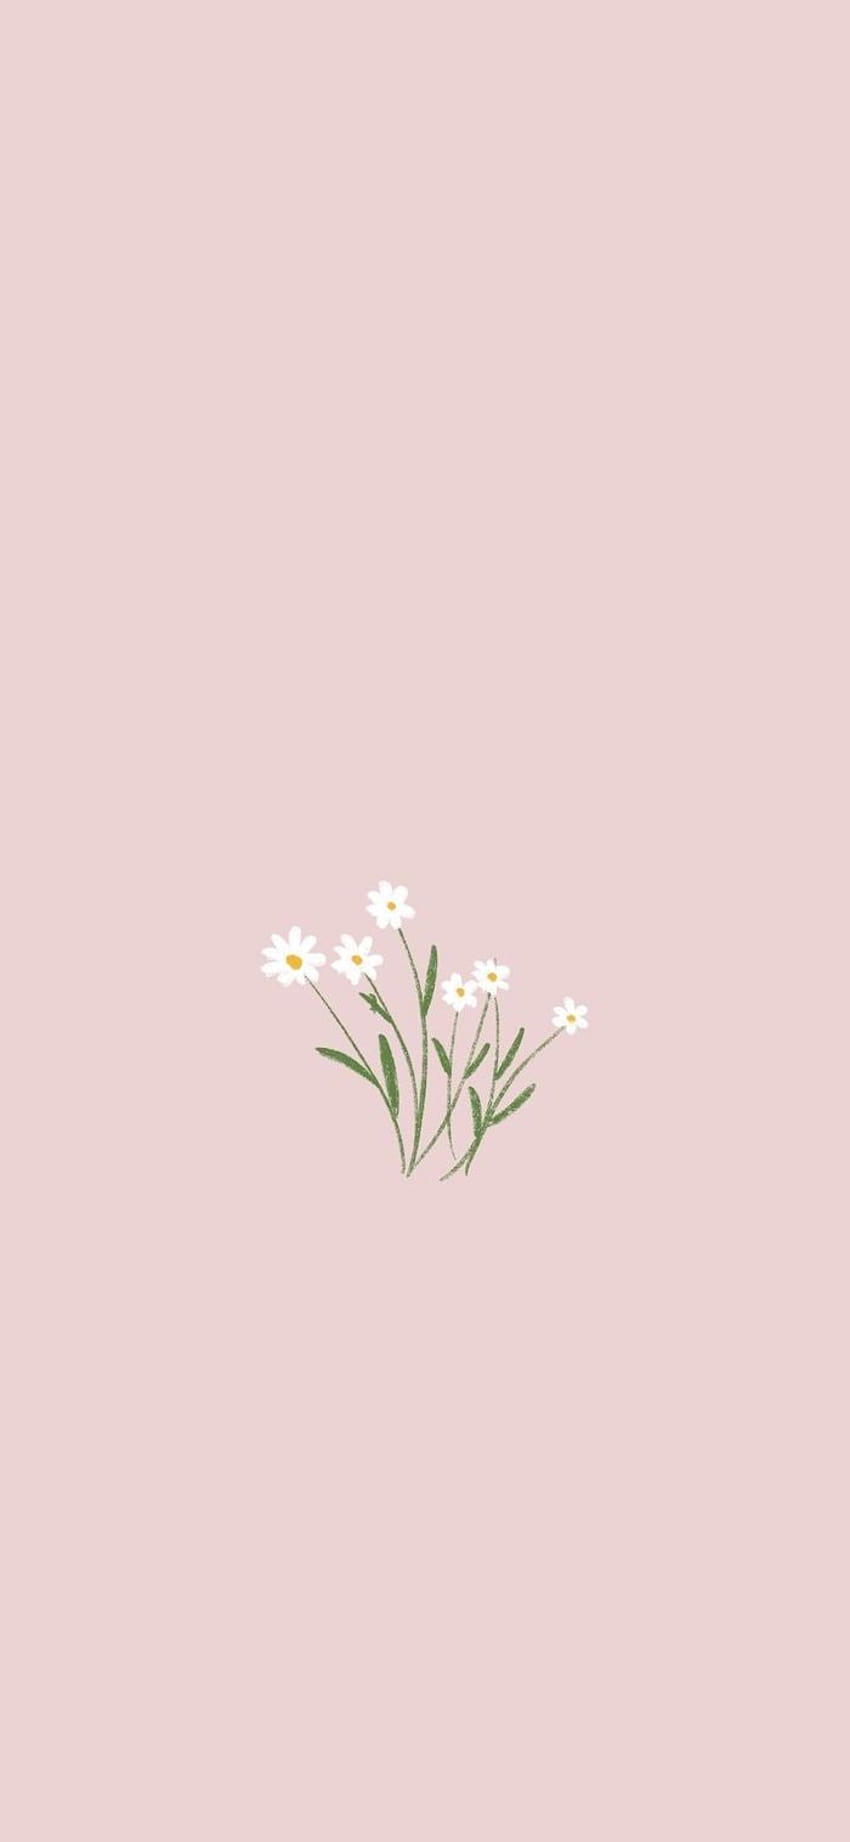 ▷ 100 ideas for a Minimalist to Enjoy the Little Things in Life, aesthetic minimalist plant HD phone wallpaper